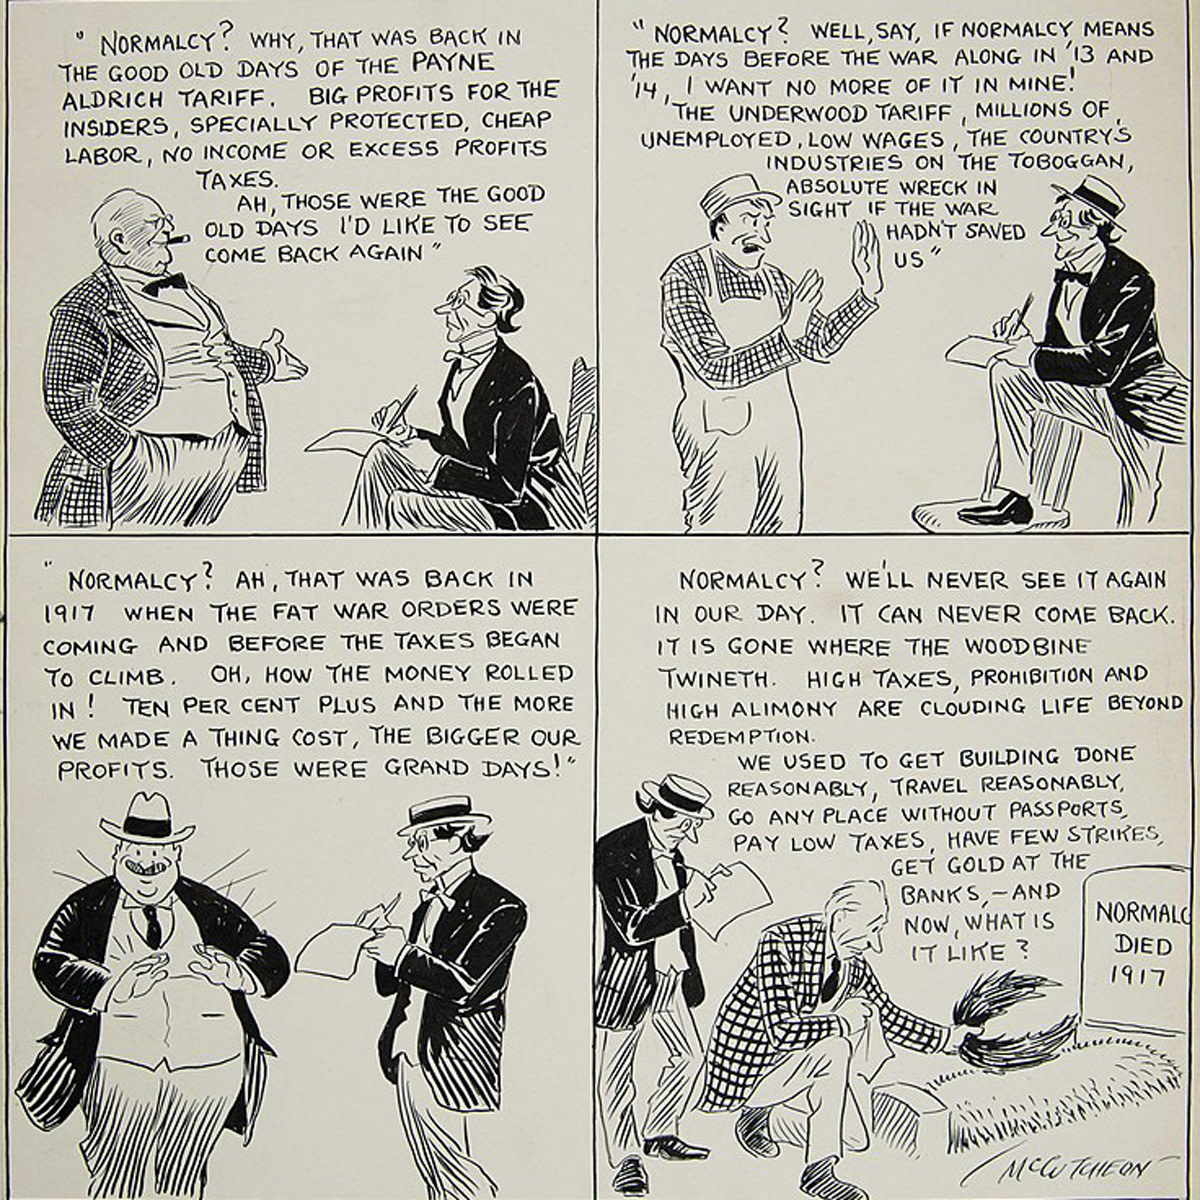 Seeing lots of talk about what normalcy will look like now that most of us are several weeks into quarantineHere's a 1921 cartoon on the "return to normalcy"